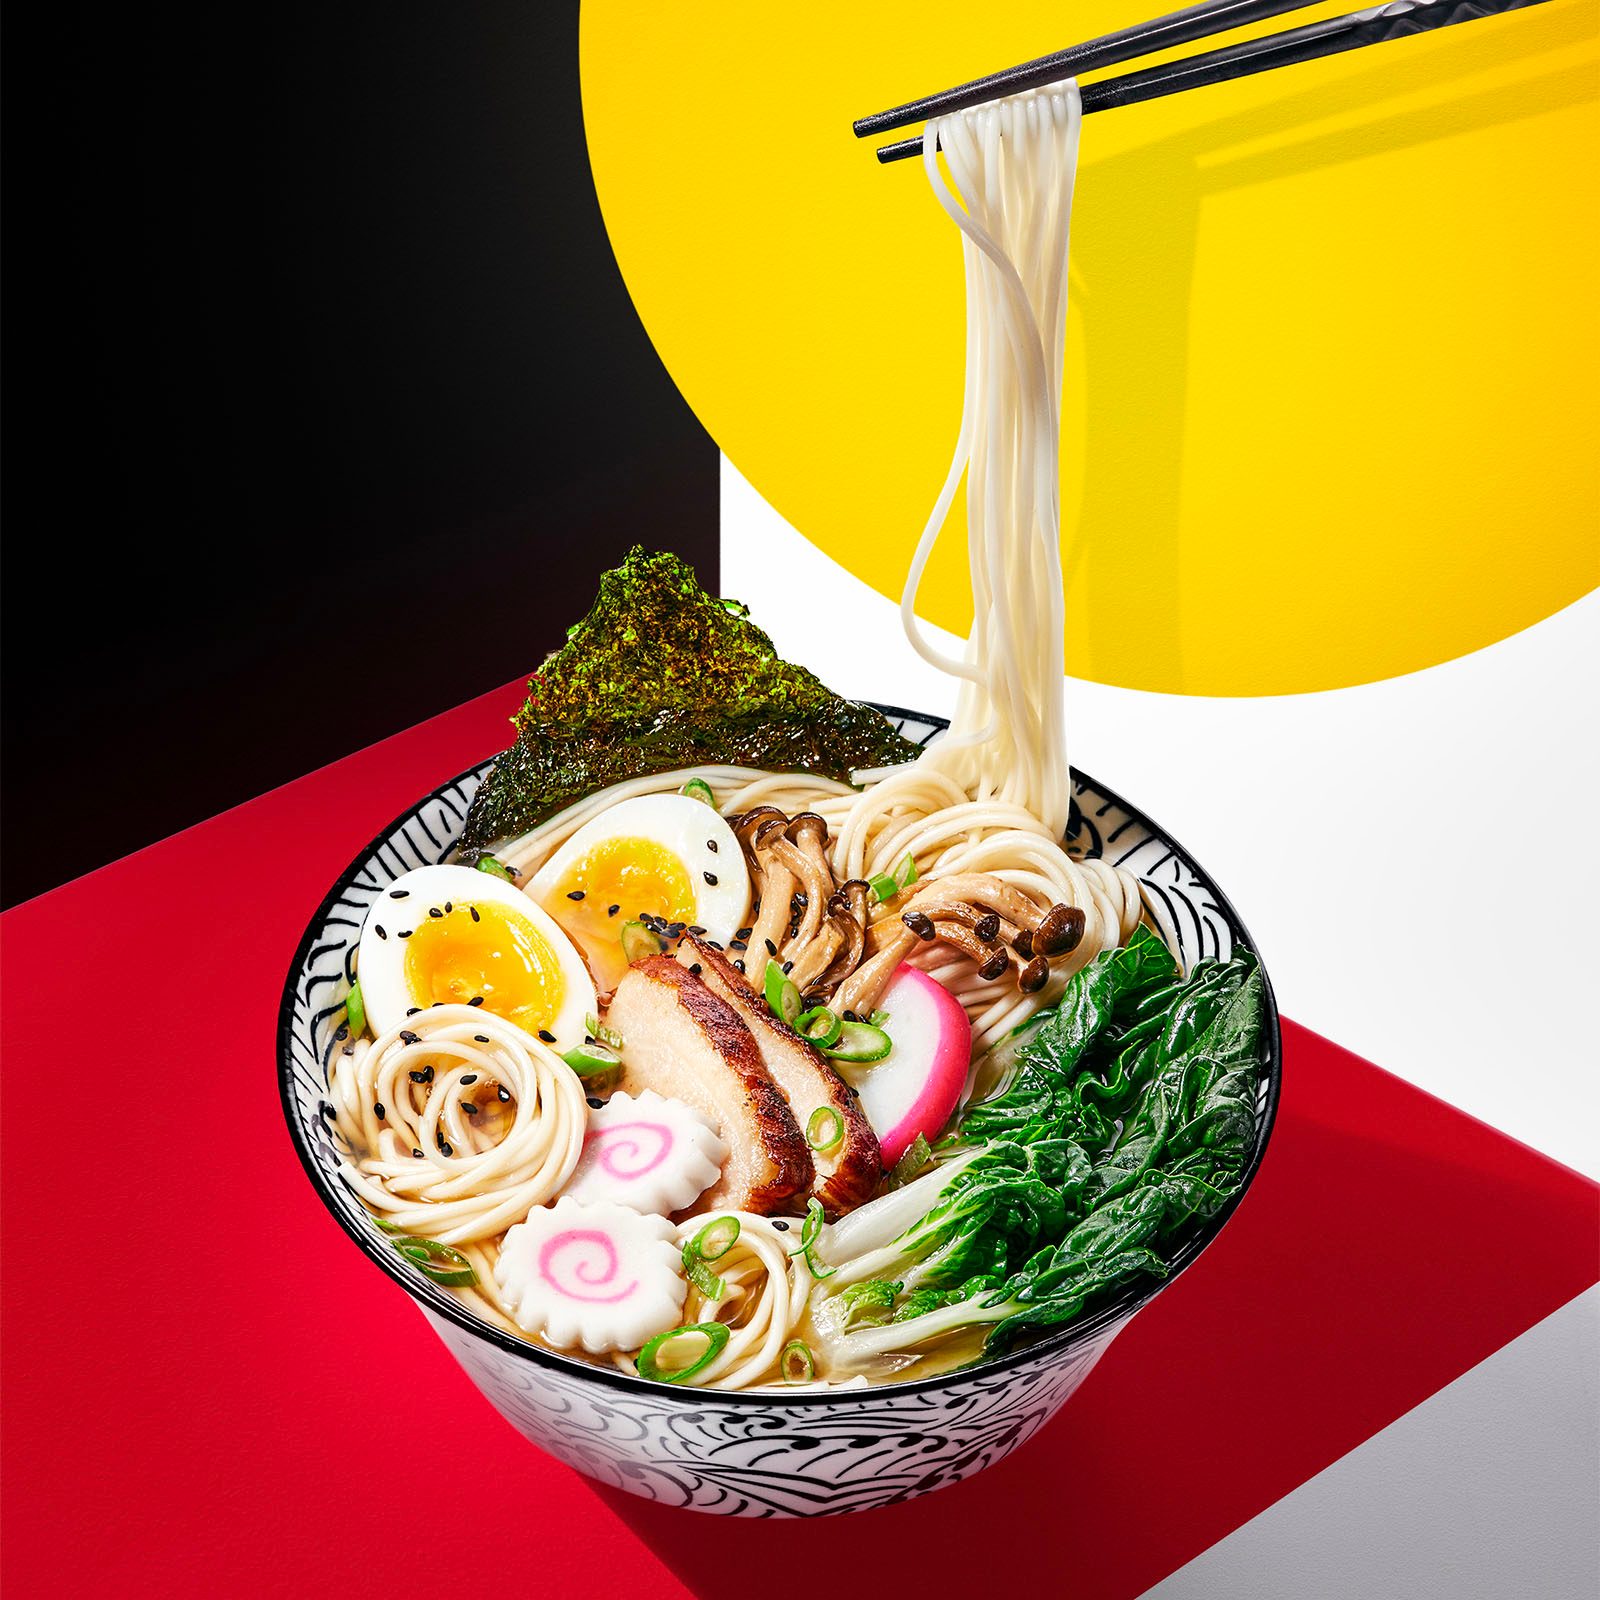 The 7 Essential Tools for Making Ramen at Home, According to Experts